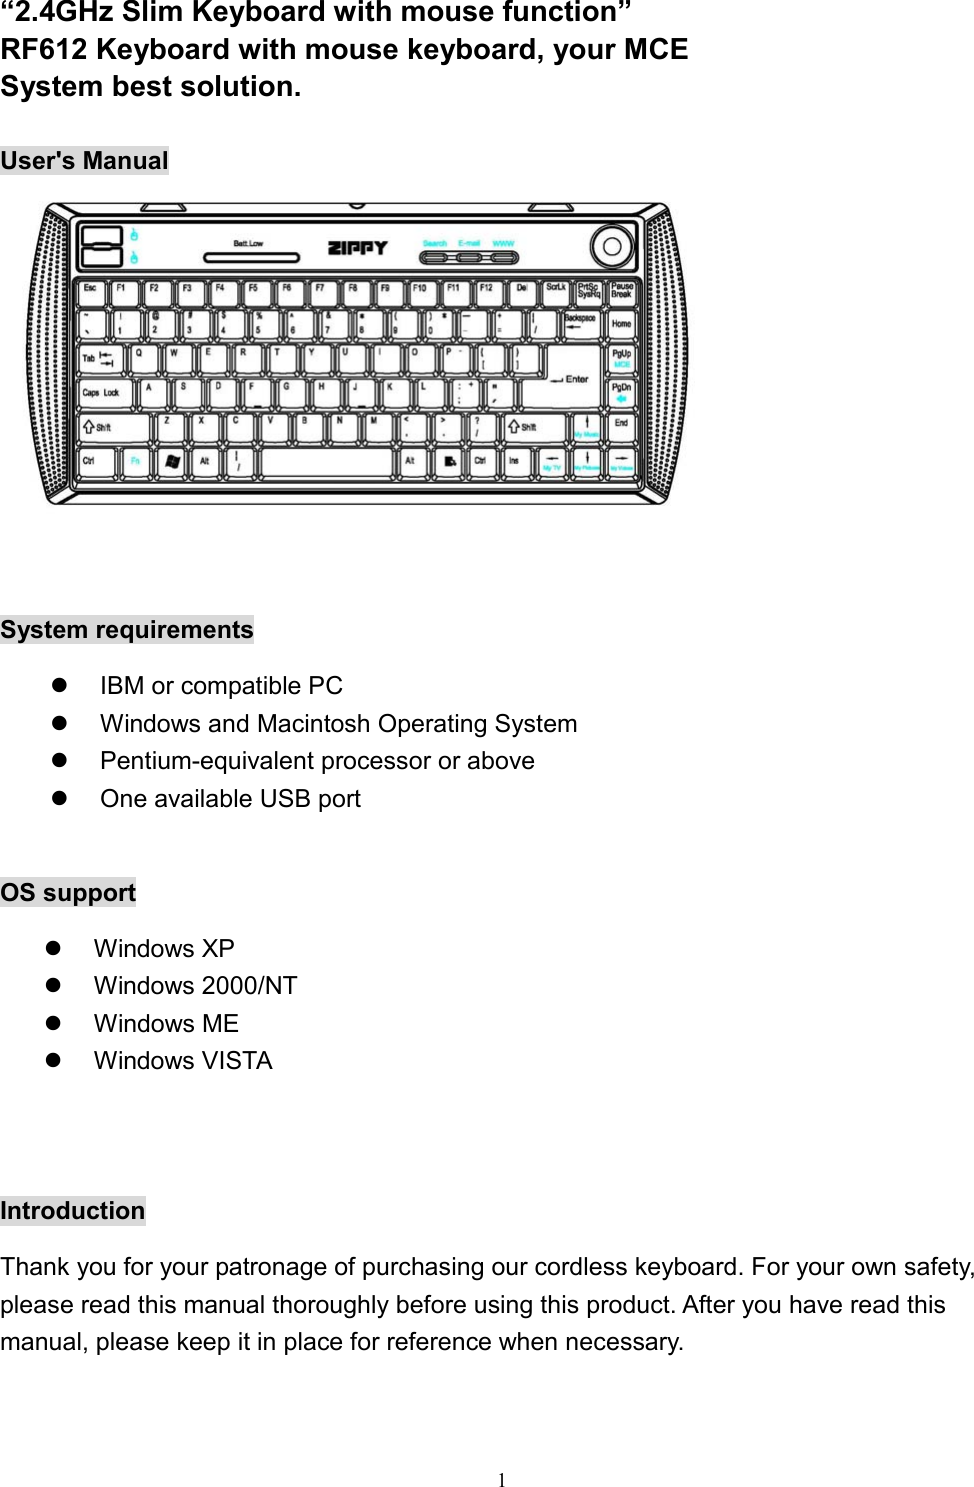  1“2.4GHz Slim Keyboard with mouse function” RF612 Keyboard with mouse keyboard, your MCE System best solution.  User&apos;s Manual   System requirements   IBM or compatible PC   Windows and Macintosh Operating System   Pentium-equivalent processor or above   One available USB port  OS support   Windows XP   Windows 2000/NT   Windows ME   Windows VISTA   Introduction Thank you for your patronage of purchasing our cordless keyboard. For your own safety, please read this manual thoroughly before using this product. After you have read this manual, please keep it in place for reference when necessary. 